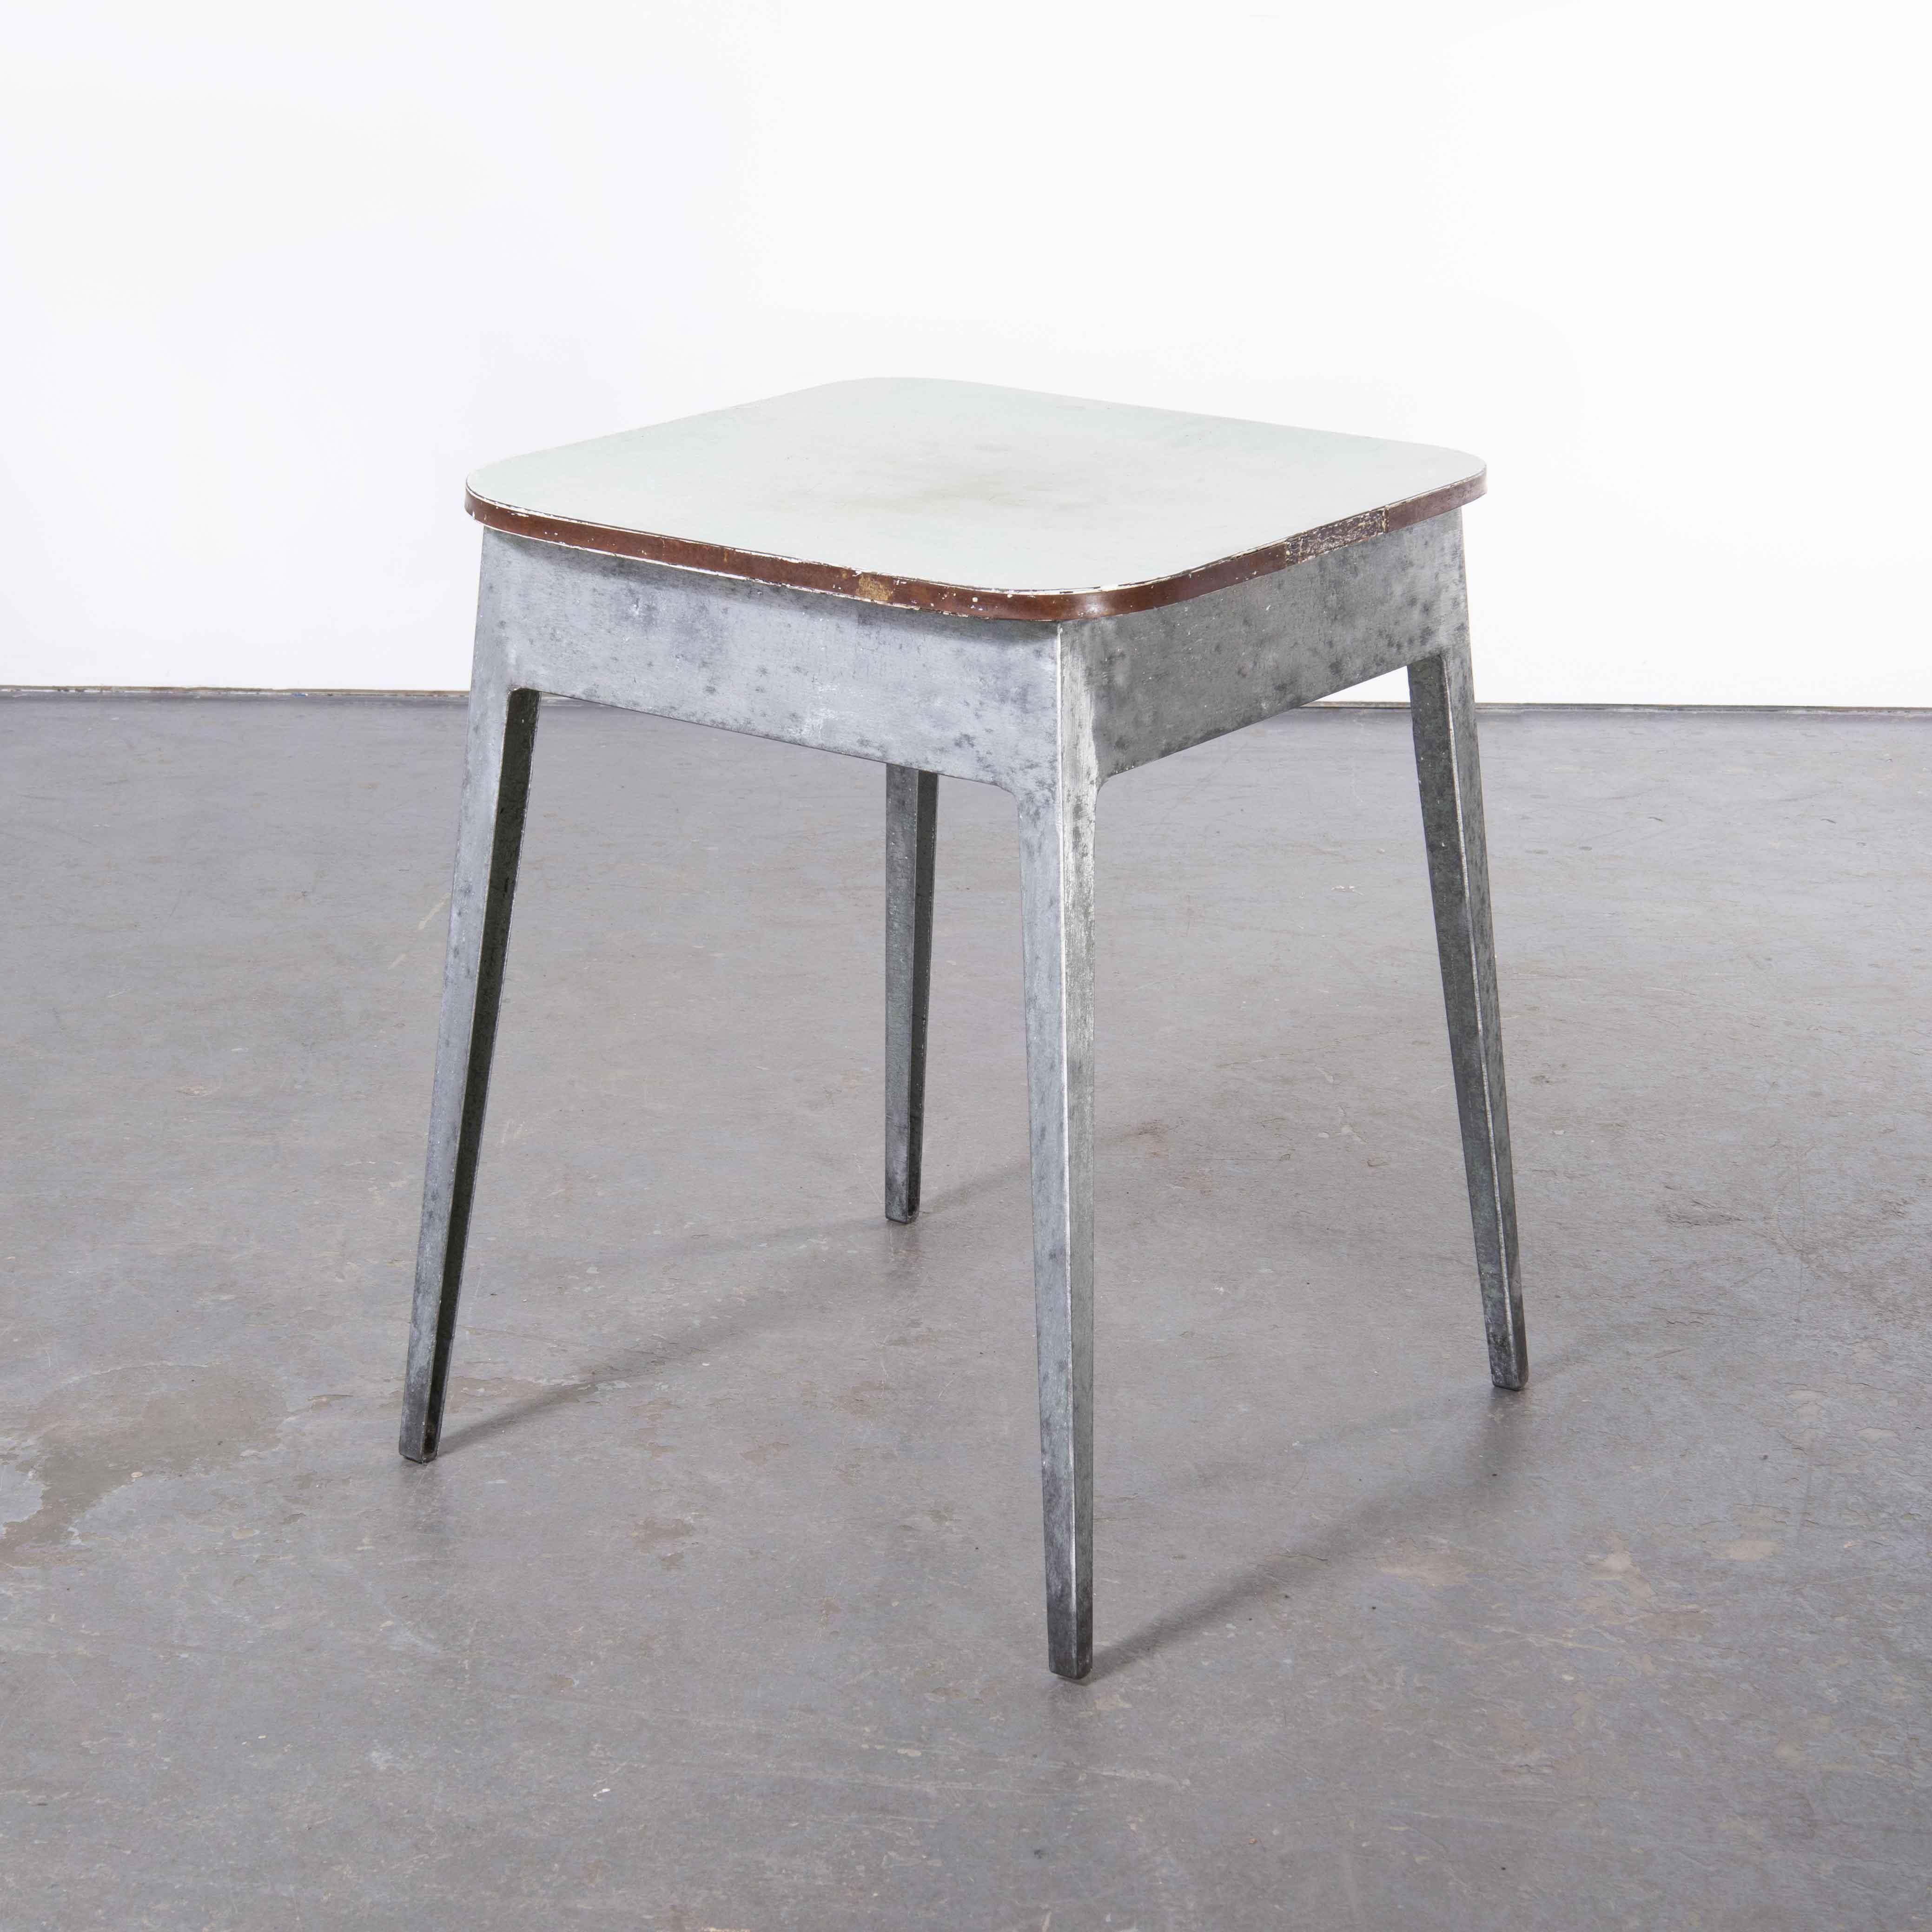 1950s vintage Edwin Cinch square cast dining table
1950s vintage Edwin Cinch square cast dining table. Edwin Cinch was best known for his role as one of two designers (the other was Herbert Cutler) commissioned in 1943 by the then Board of Trade to